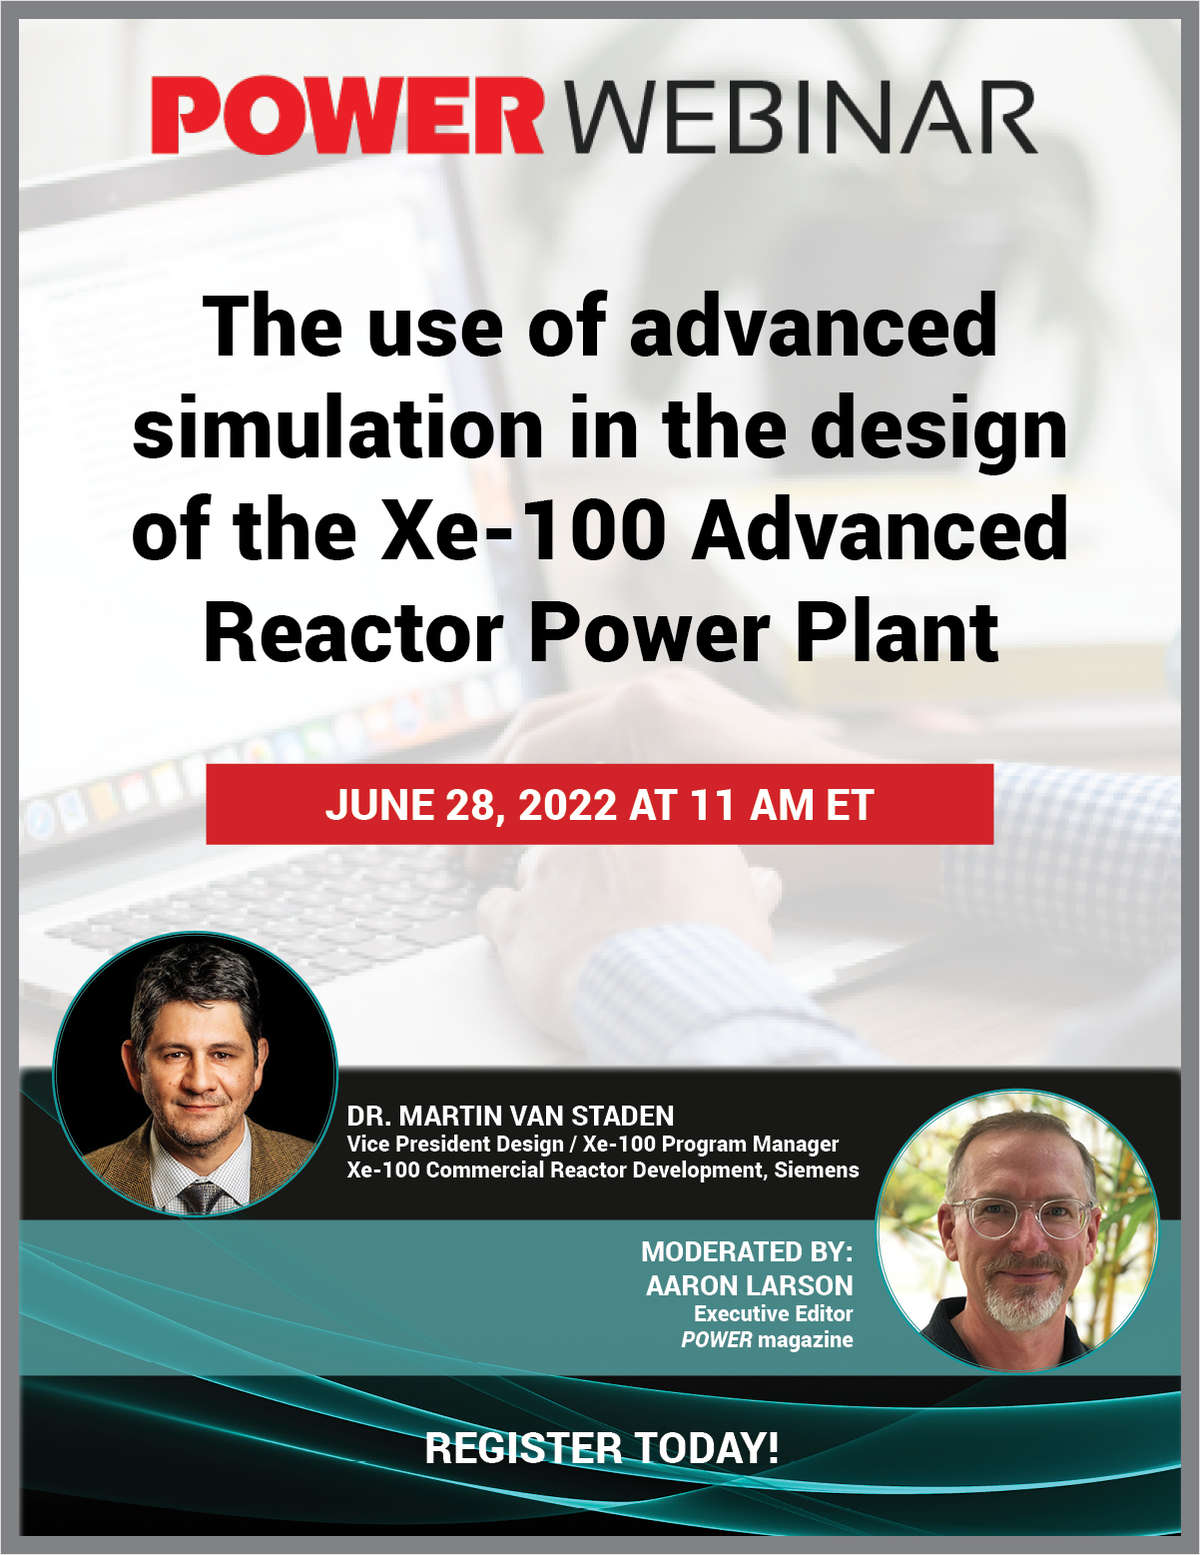 The use of advanced simulation in the design of the Xe-100 Advanced Reactor Power Plant